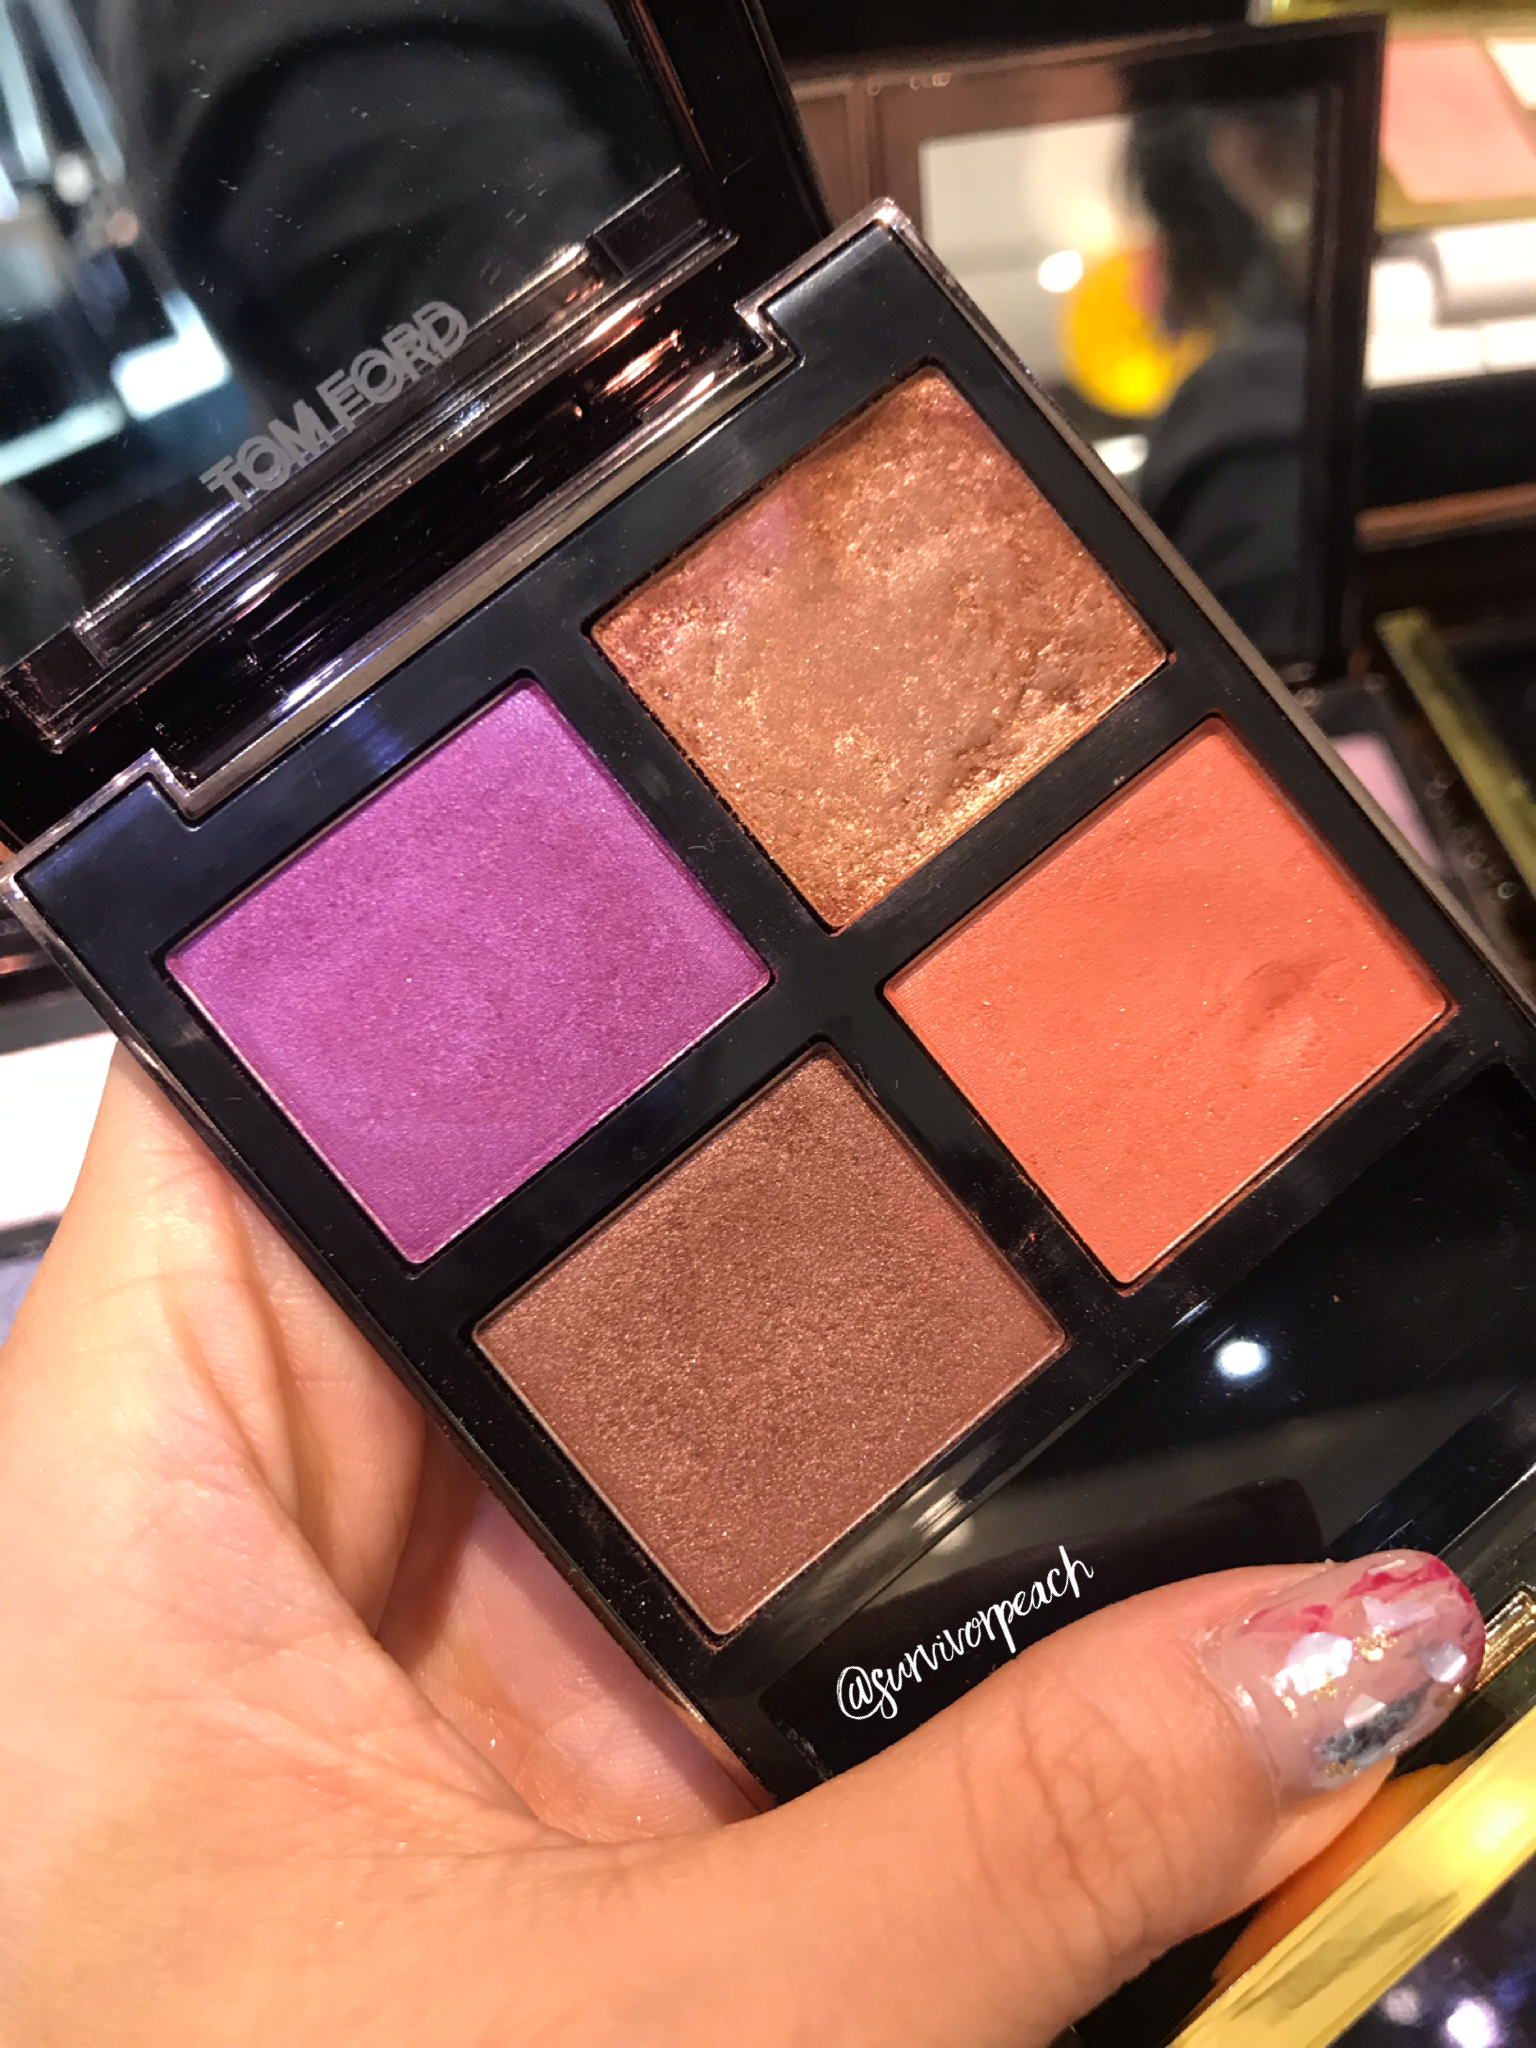 Tom Ford Eye Quad additions for 2019: Swatches and my picks — Survivorpeach